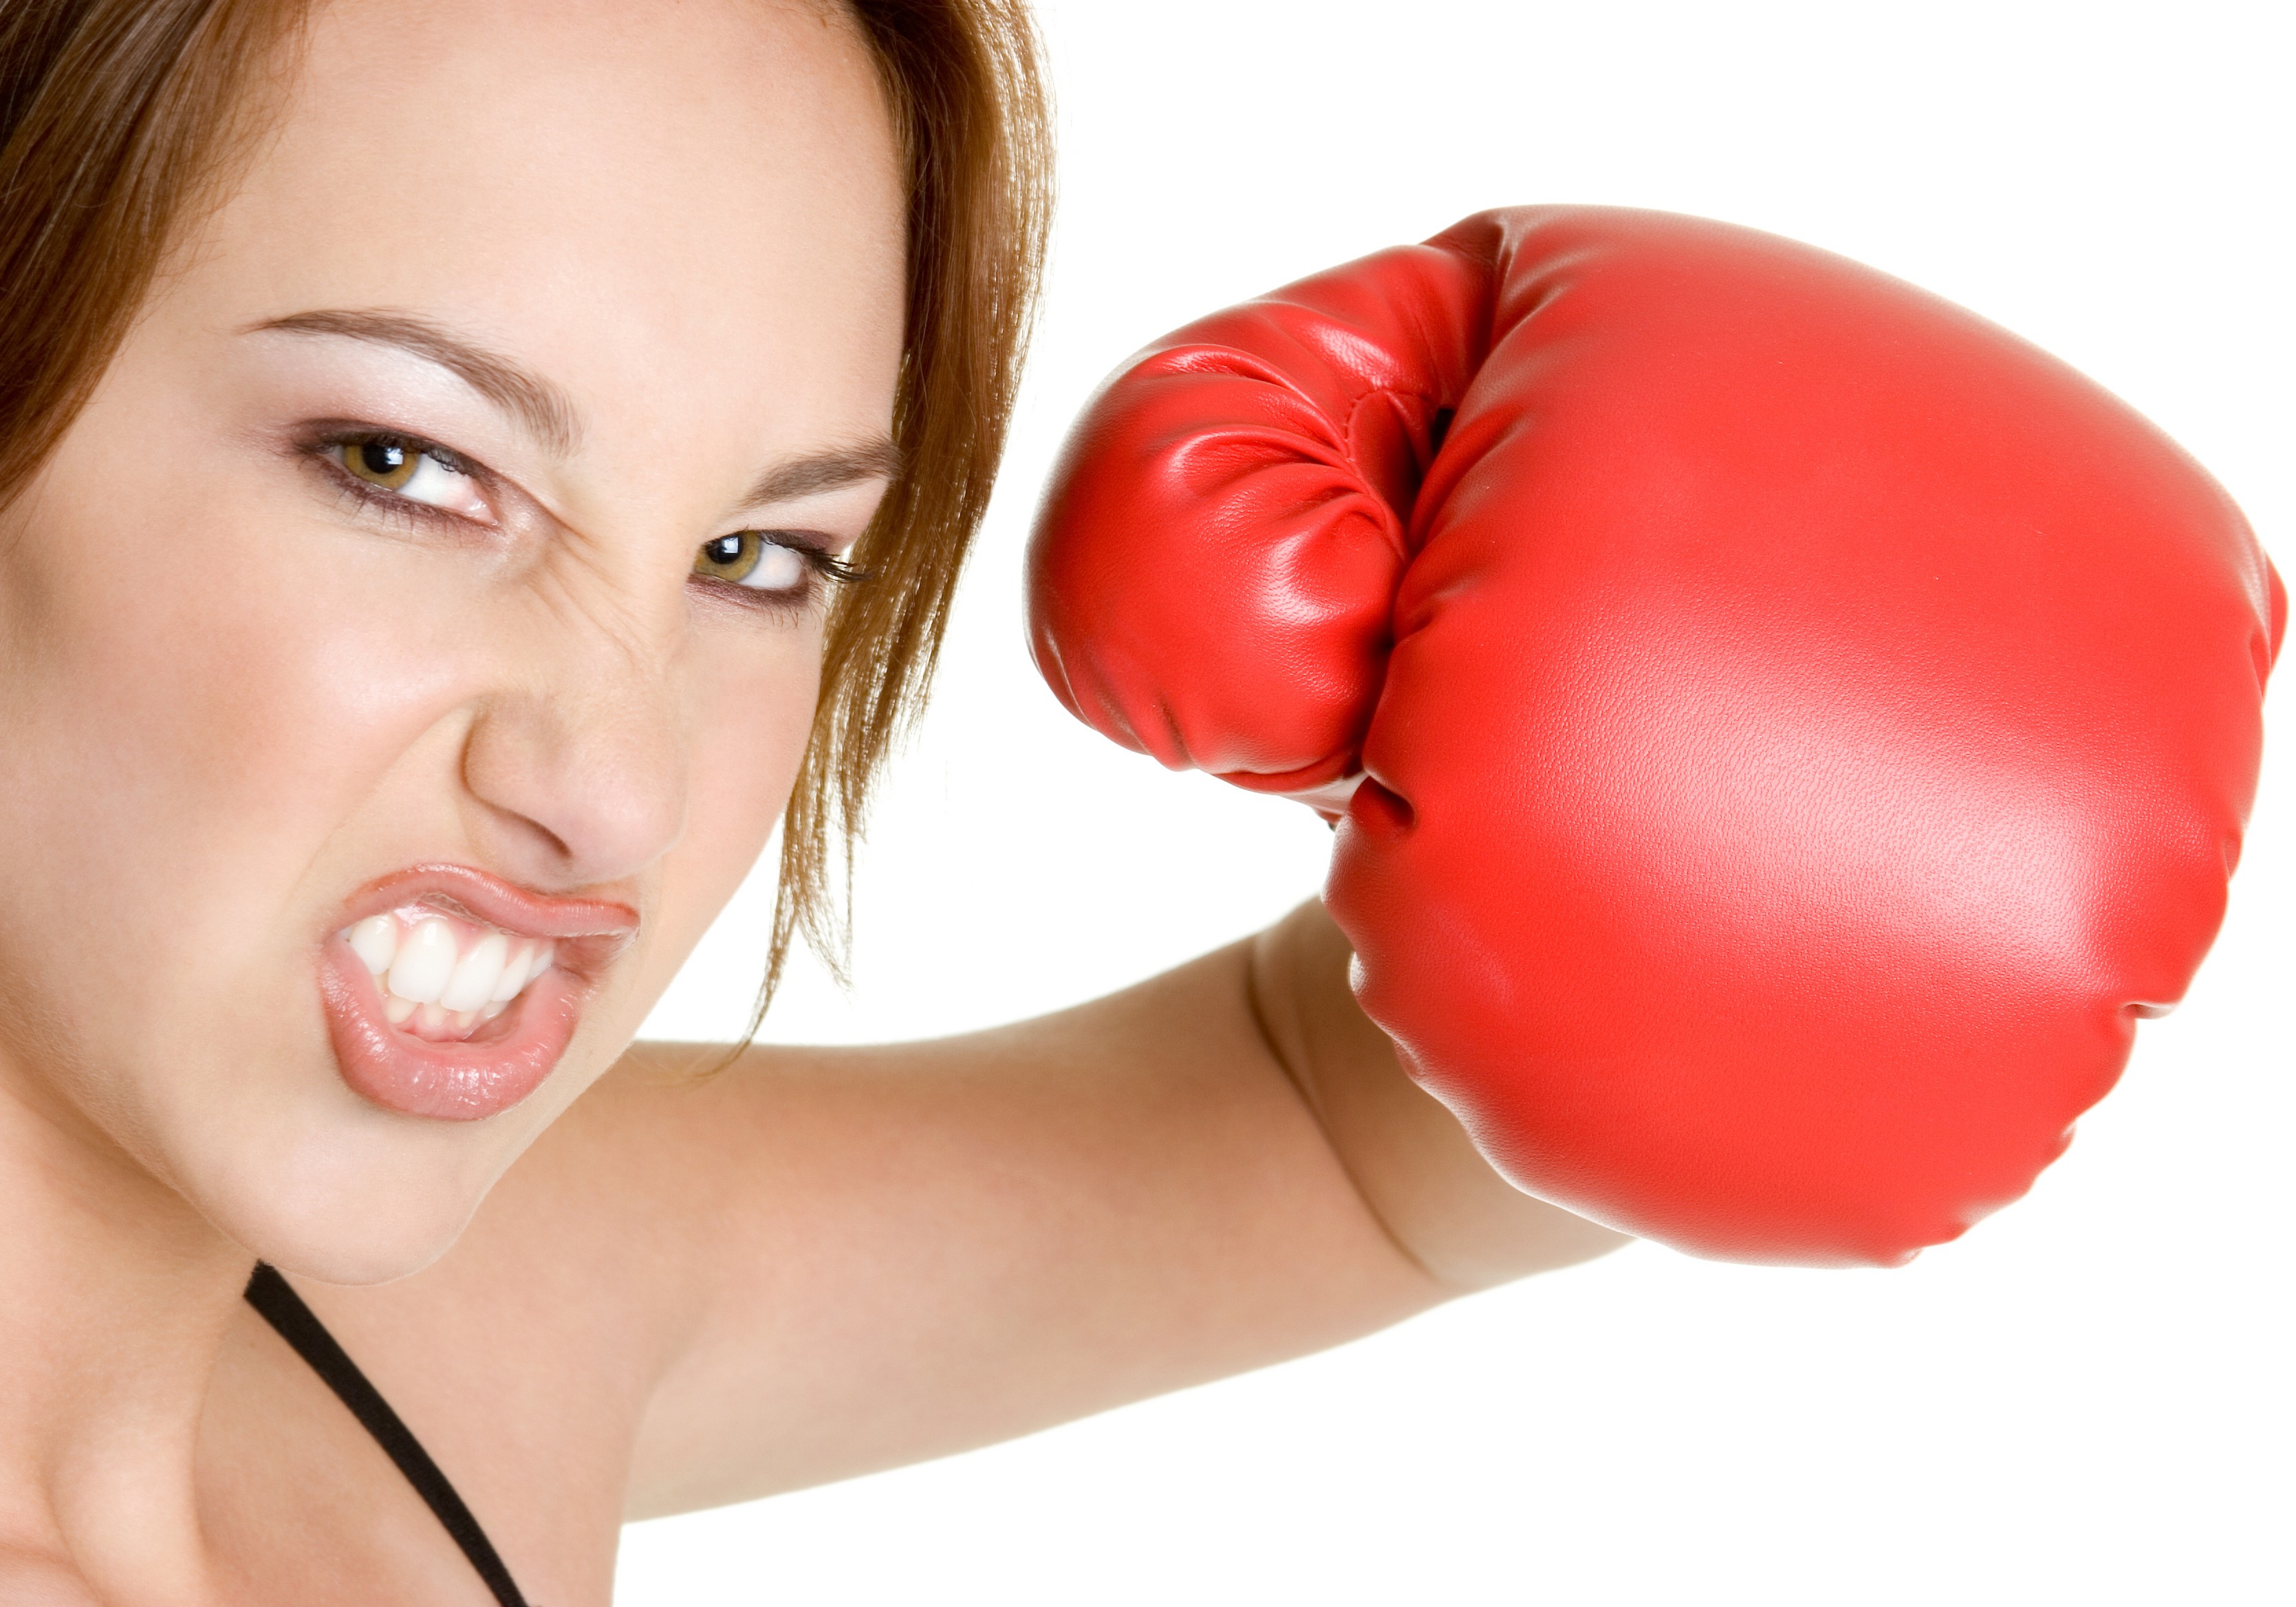 Women Model Boxing Gloves Looking At Viewer 3338x2336